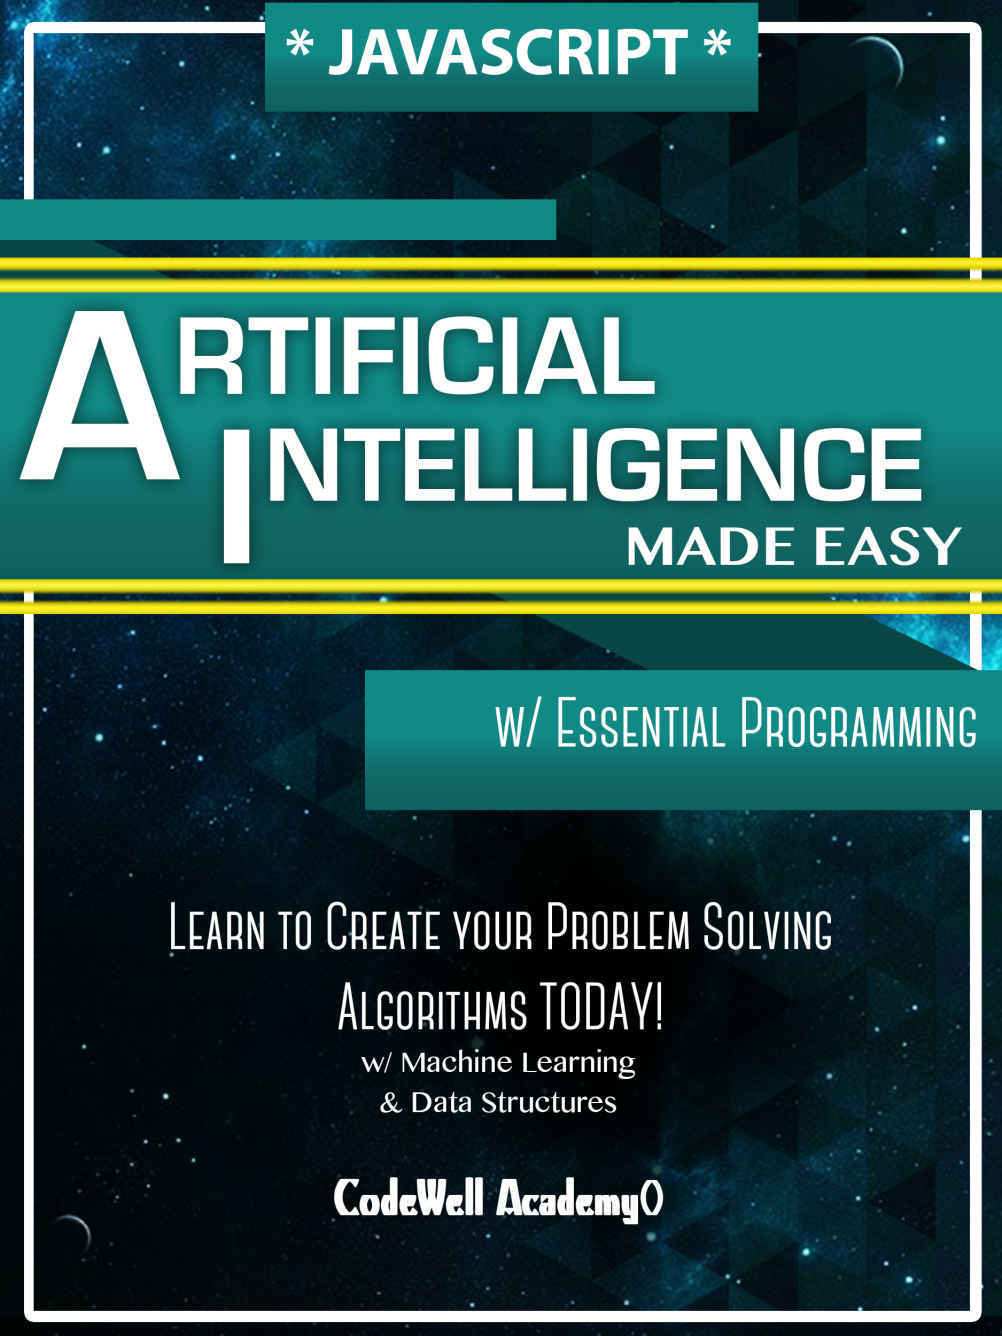 Javascript Artificial Intelligence: Made Easy, w/ Essential Programming; Create your * Problem Solving * Algorithms! TODAY! w/ Machine Learning & Data Structures (Artificial Intelligence Series) by Code Well Academy